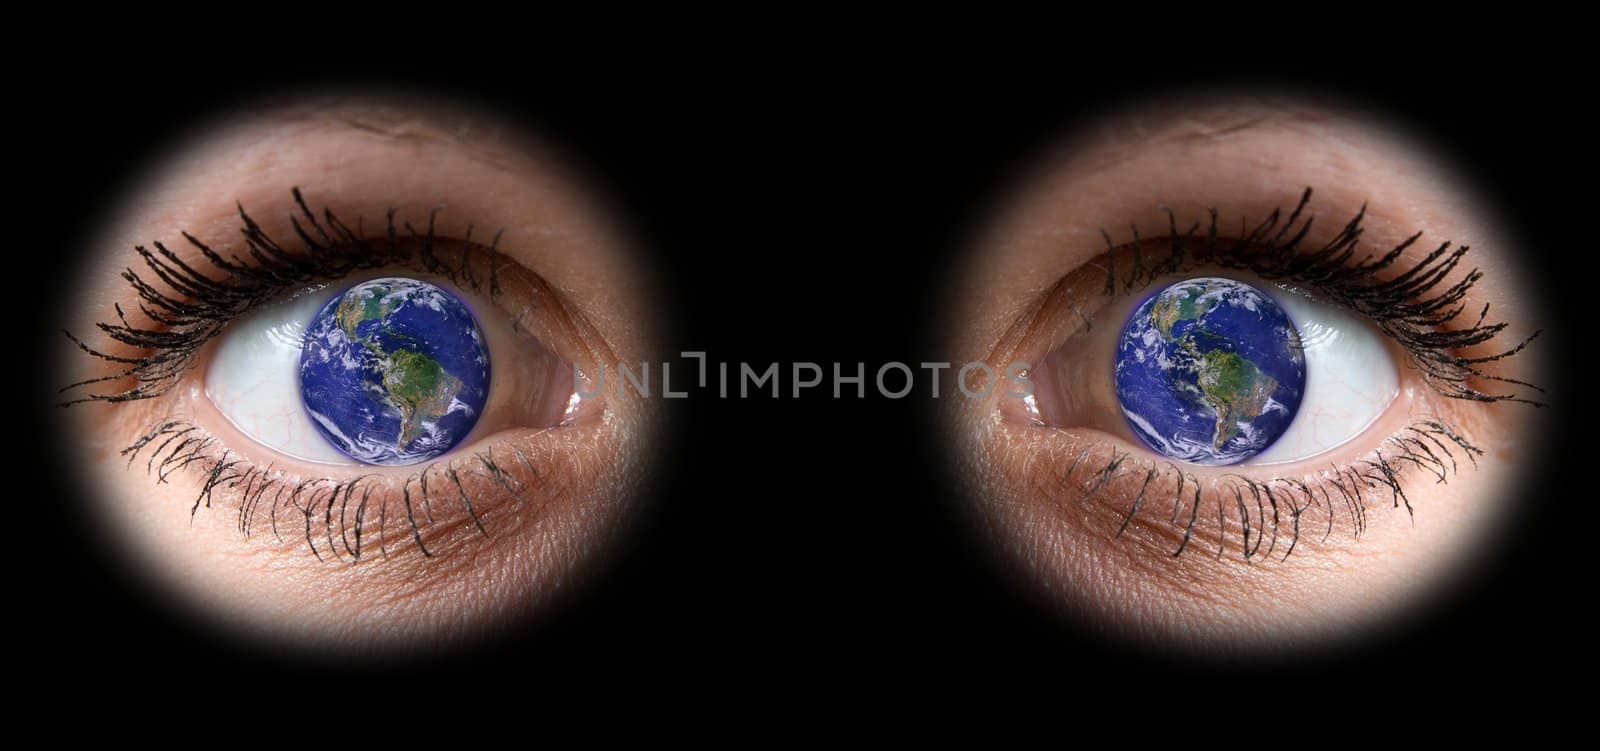 close up of a girl eyes with planet Earth into the pupil

